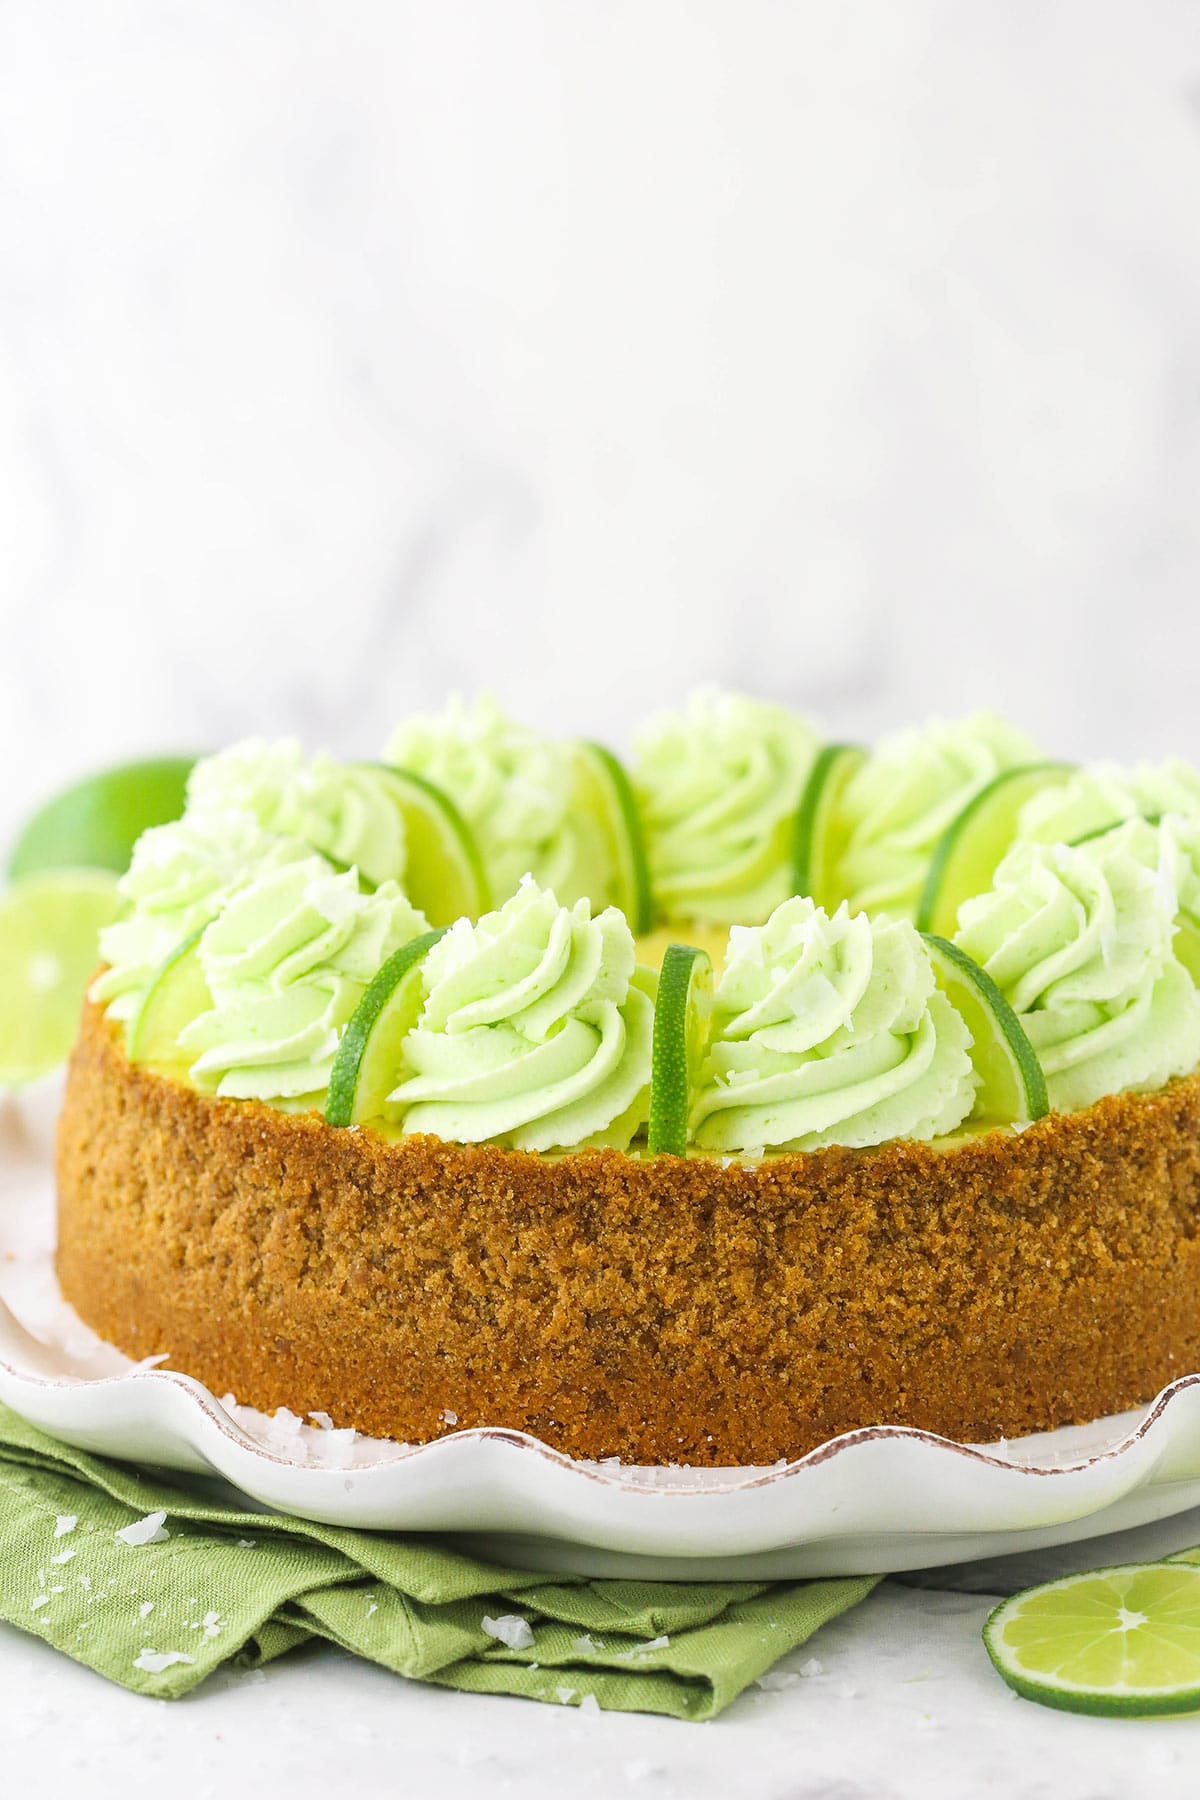 The side view of a tequila lime cake topped with tequila whipped cream and thin lime slices